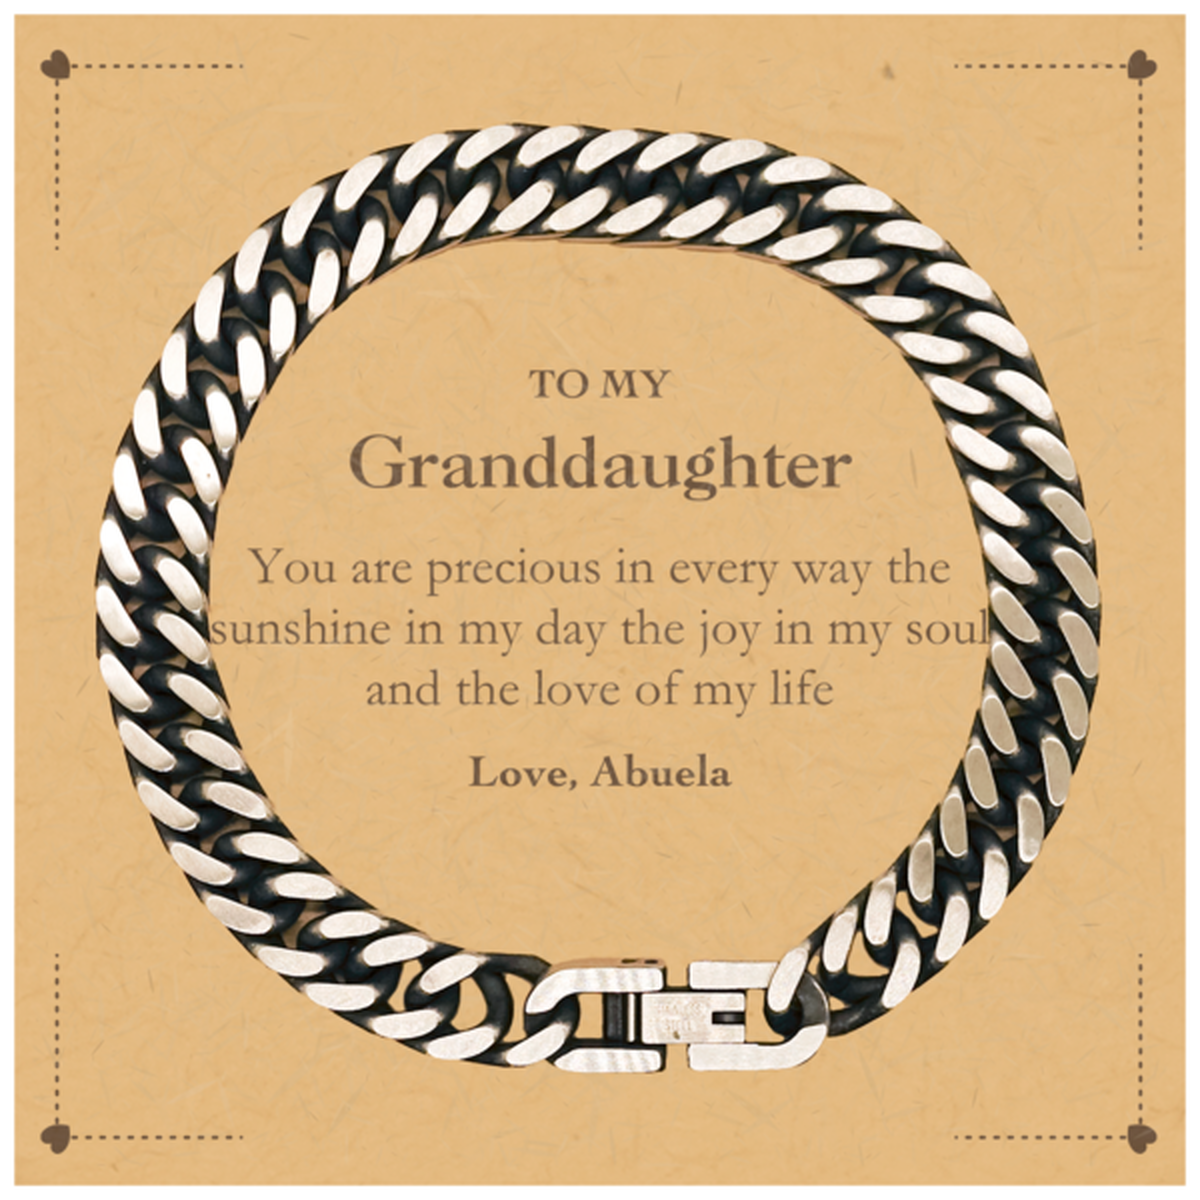 Graduation Gifts for Granddaughter Cuban Link Chain Bracelet Present from Abuela, Christmas Granddaughter Birthday Gifts Granddaughter You are precious in every way the sunshine in my day. Love, Abuela